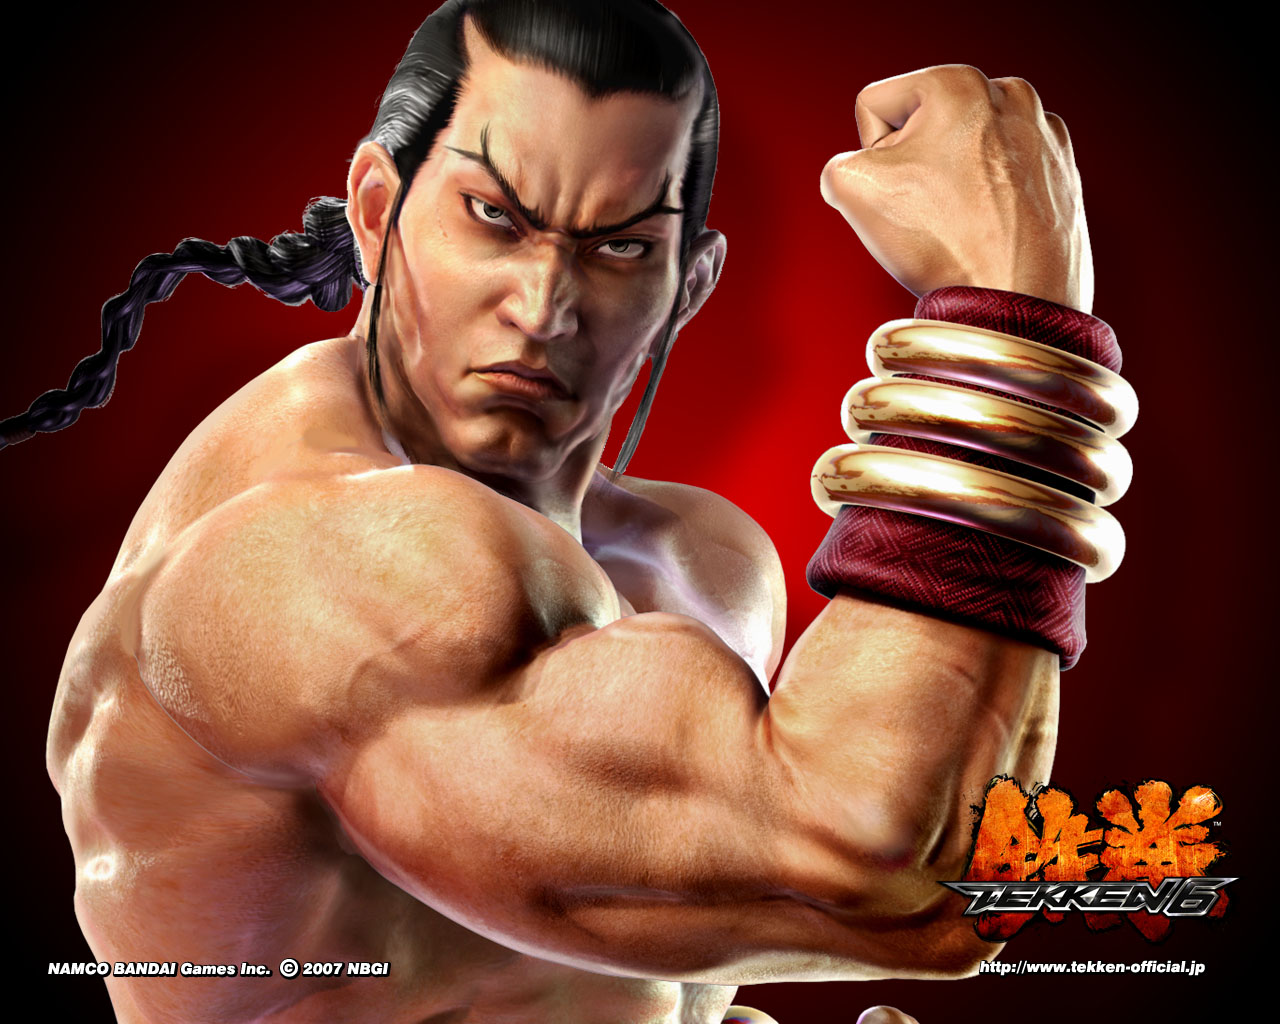 Why those 5 from Gamescom wont stick in the Tekken 8 Beta? I mean they were  announced a long ago already but Feng just dropped today and he's already  in? How tf